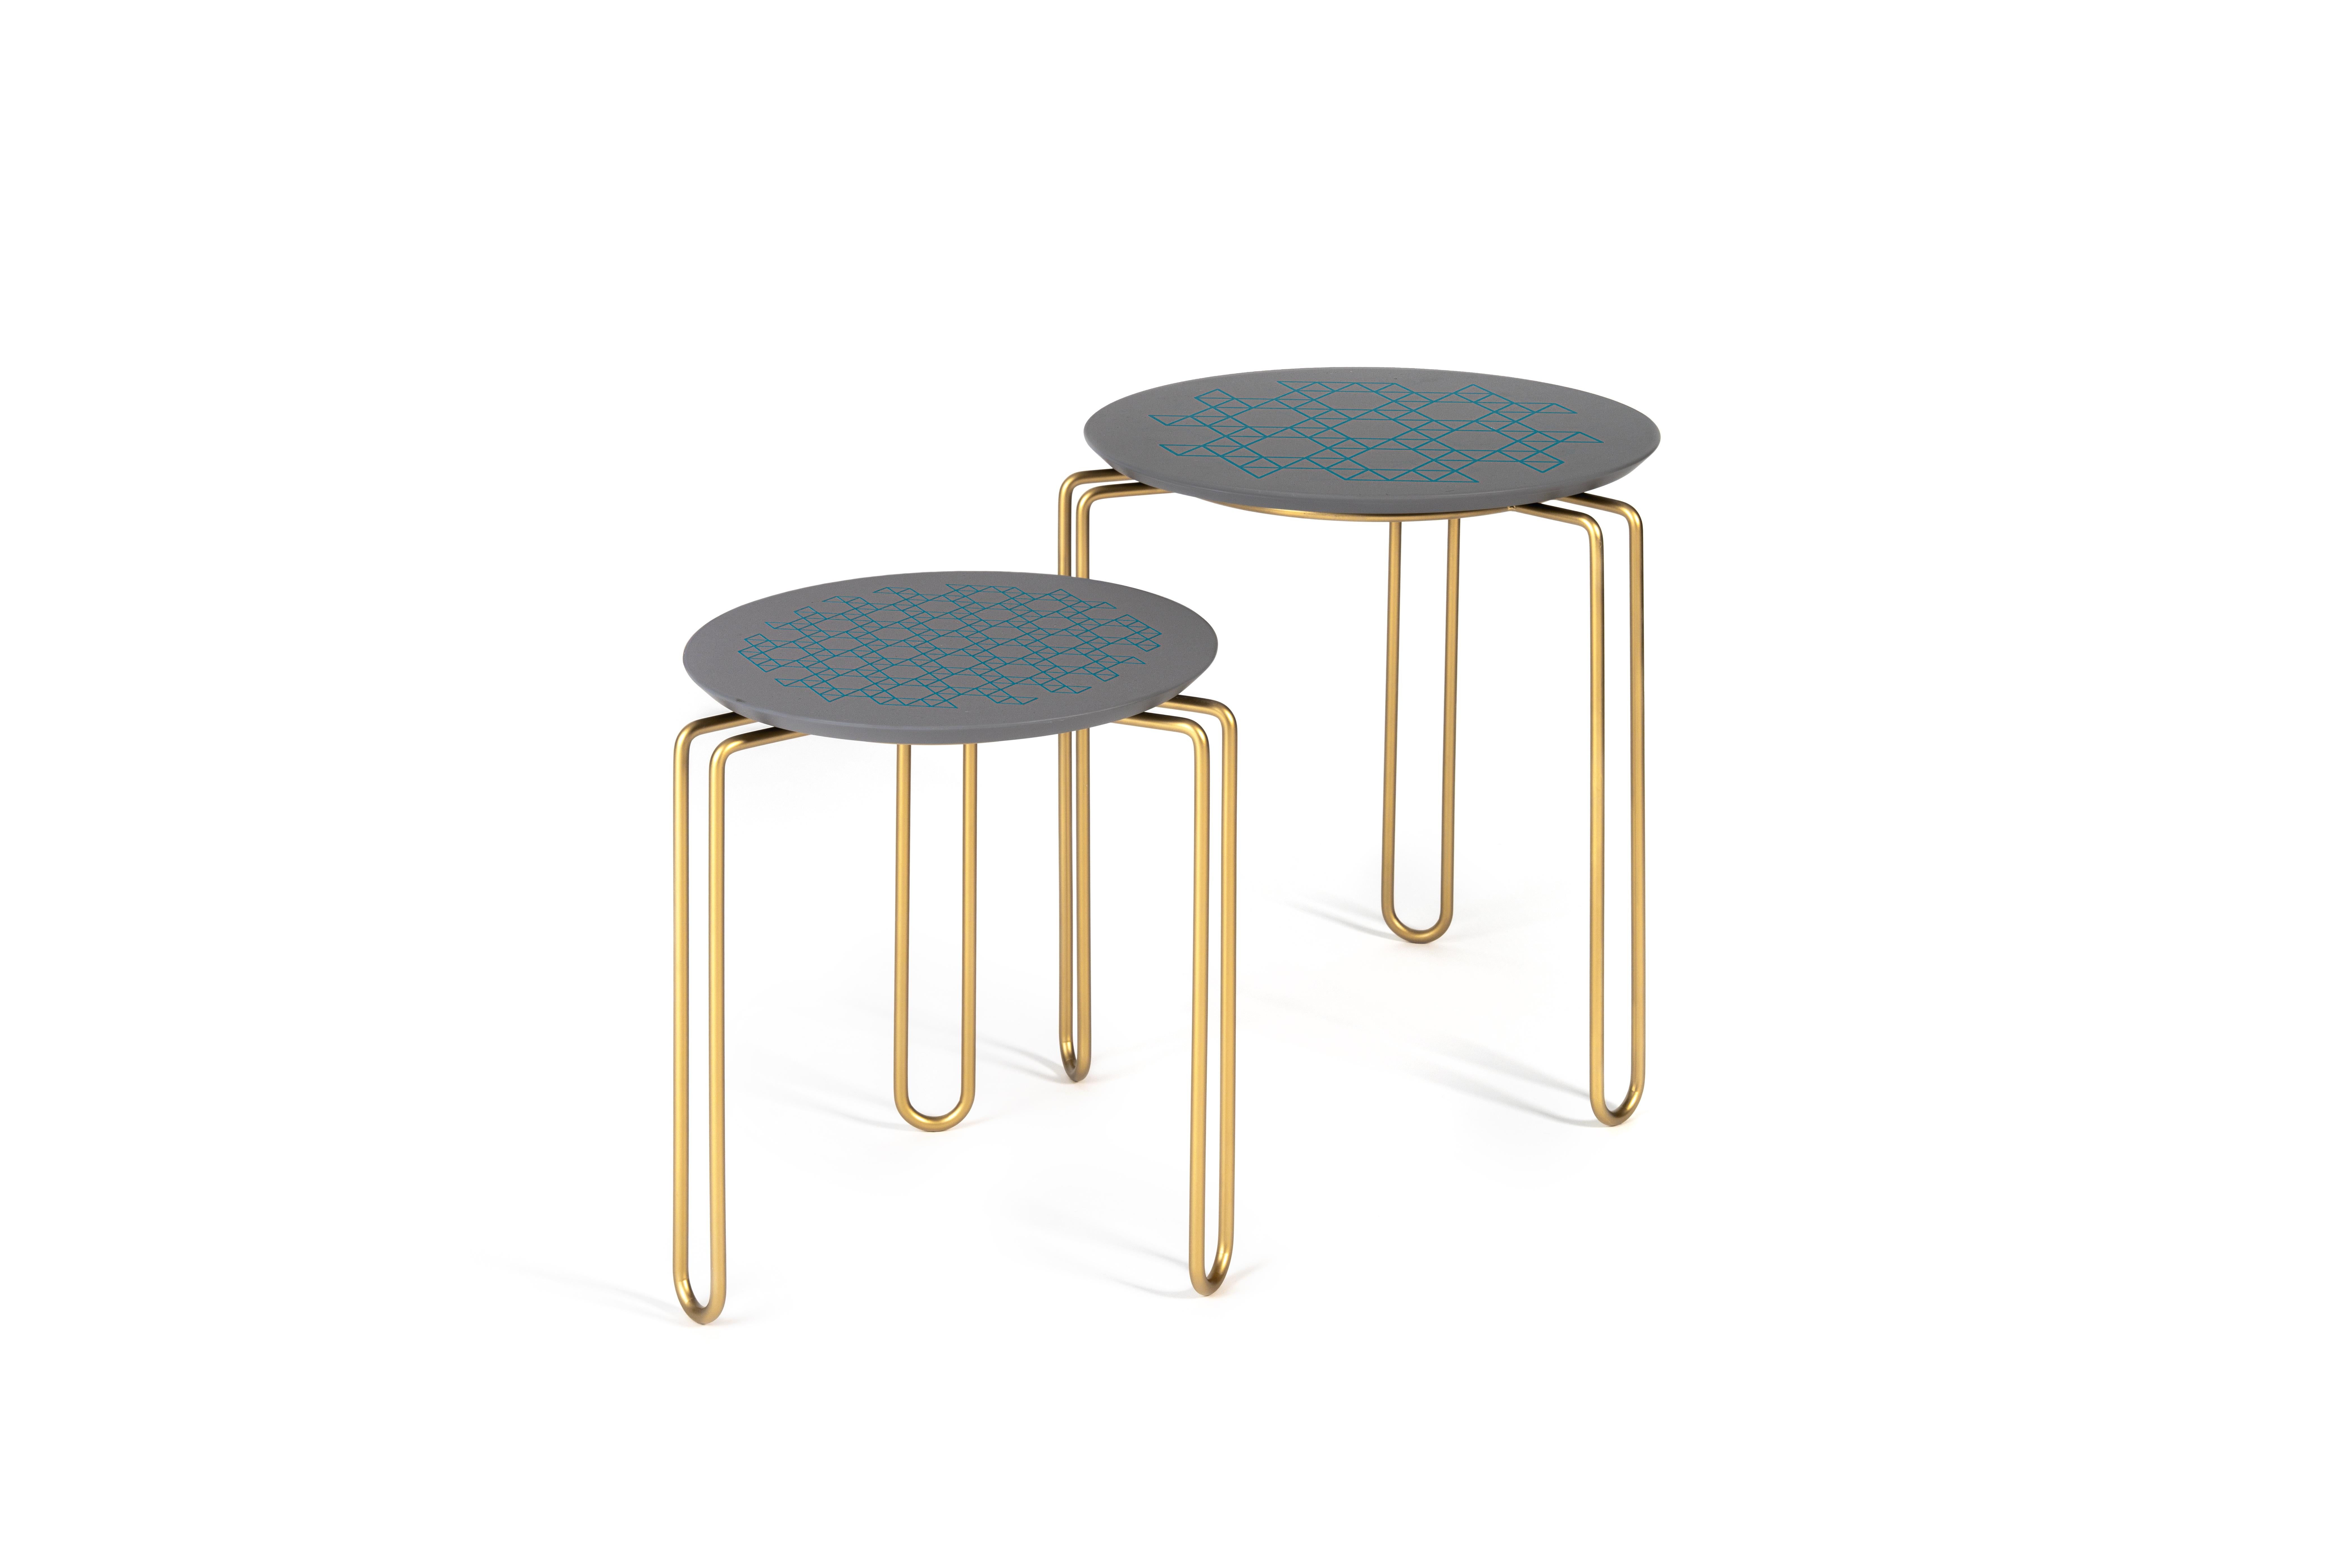 Set of 2 caleido coffee table by Mentemano
Dimensions: 
42 x H 47 cm
35 x H 41 cm
Materials: steel, wood 


A bended steel structure of curves with three double legs. The circular stand top is made of lacquered wood and enriched with digital